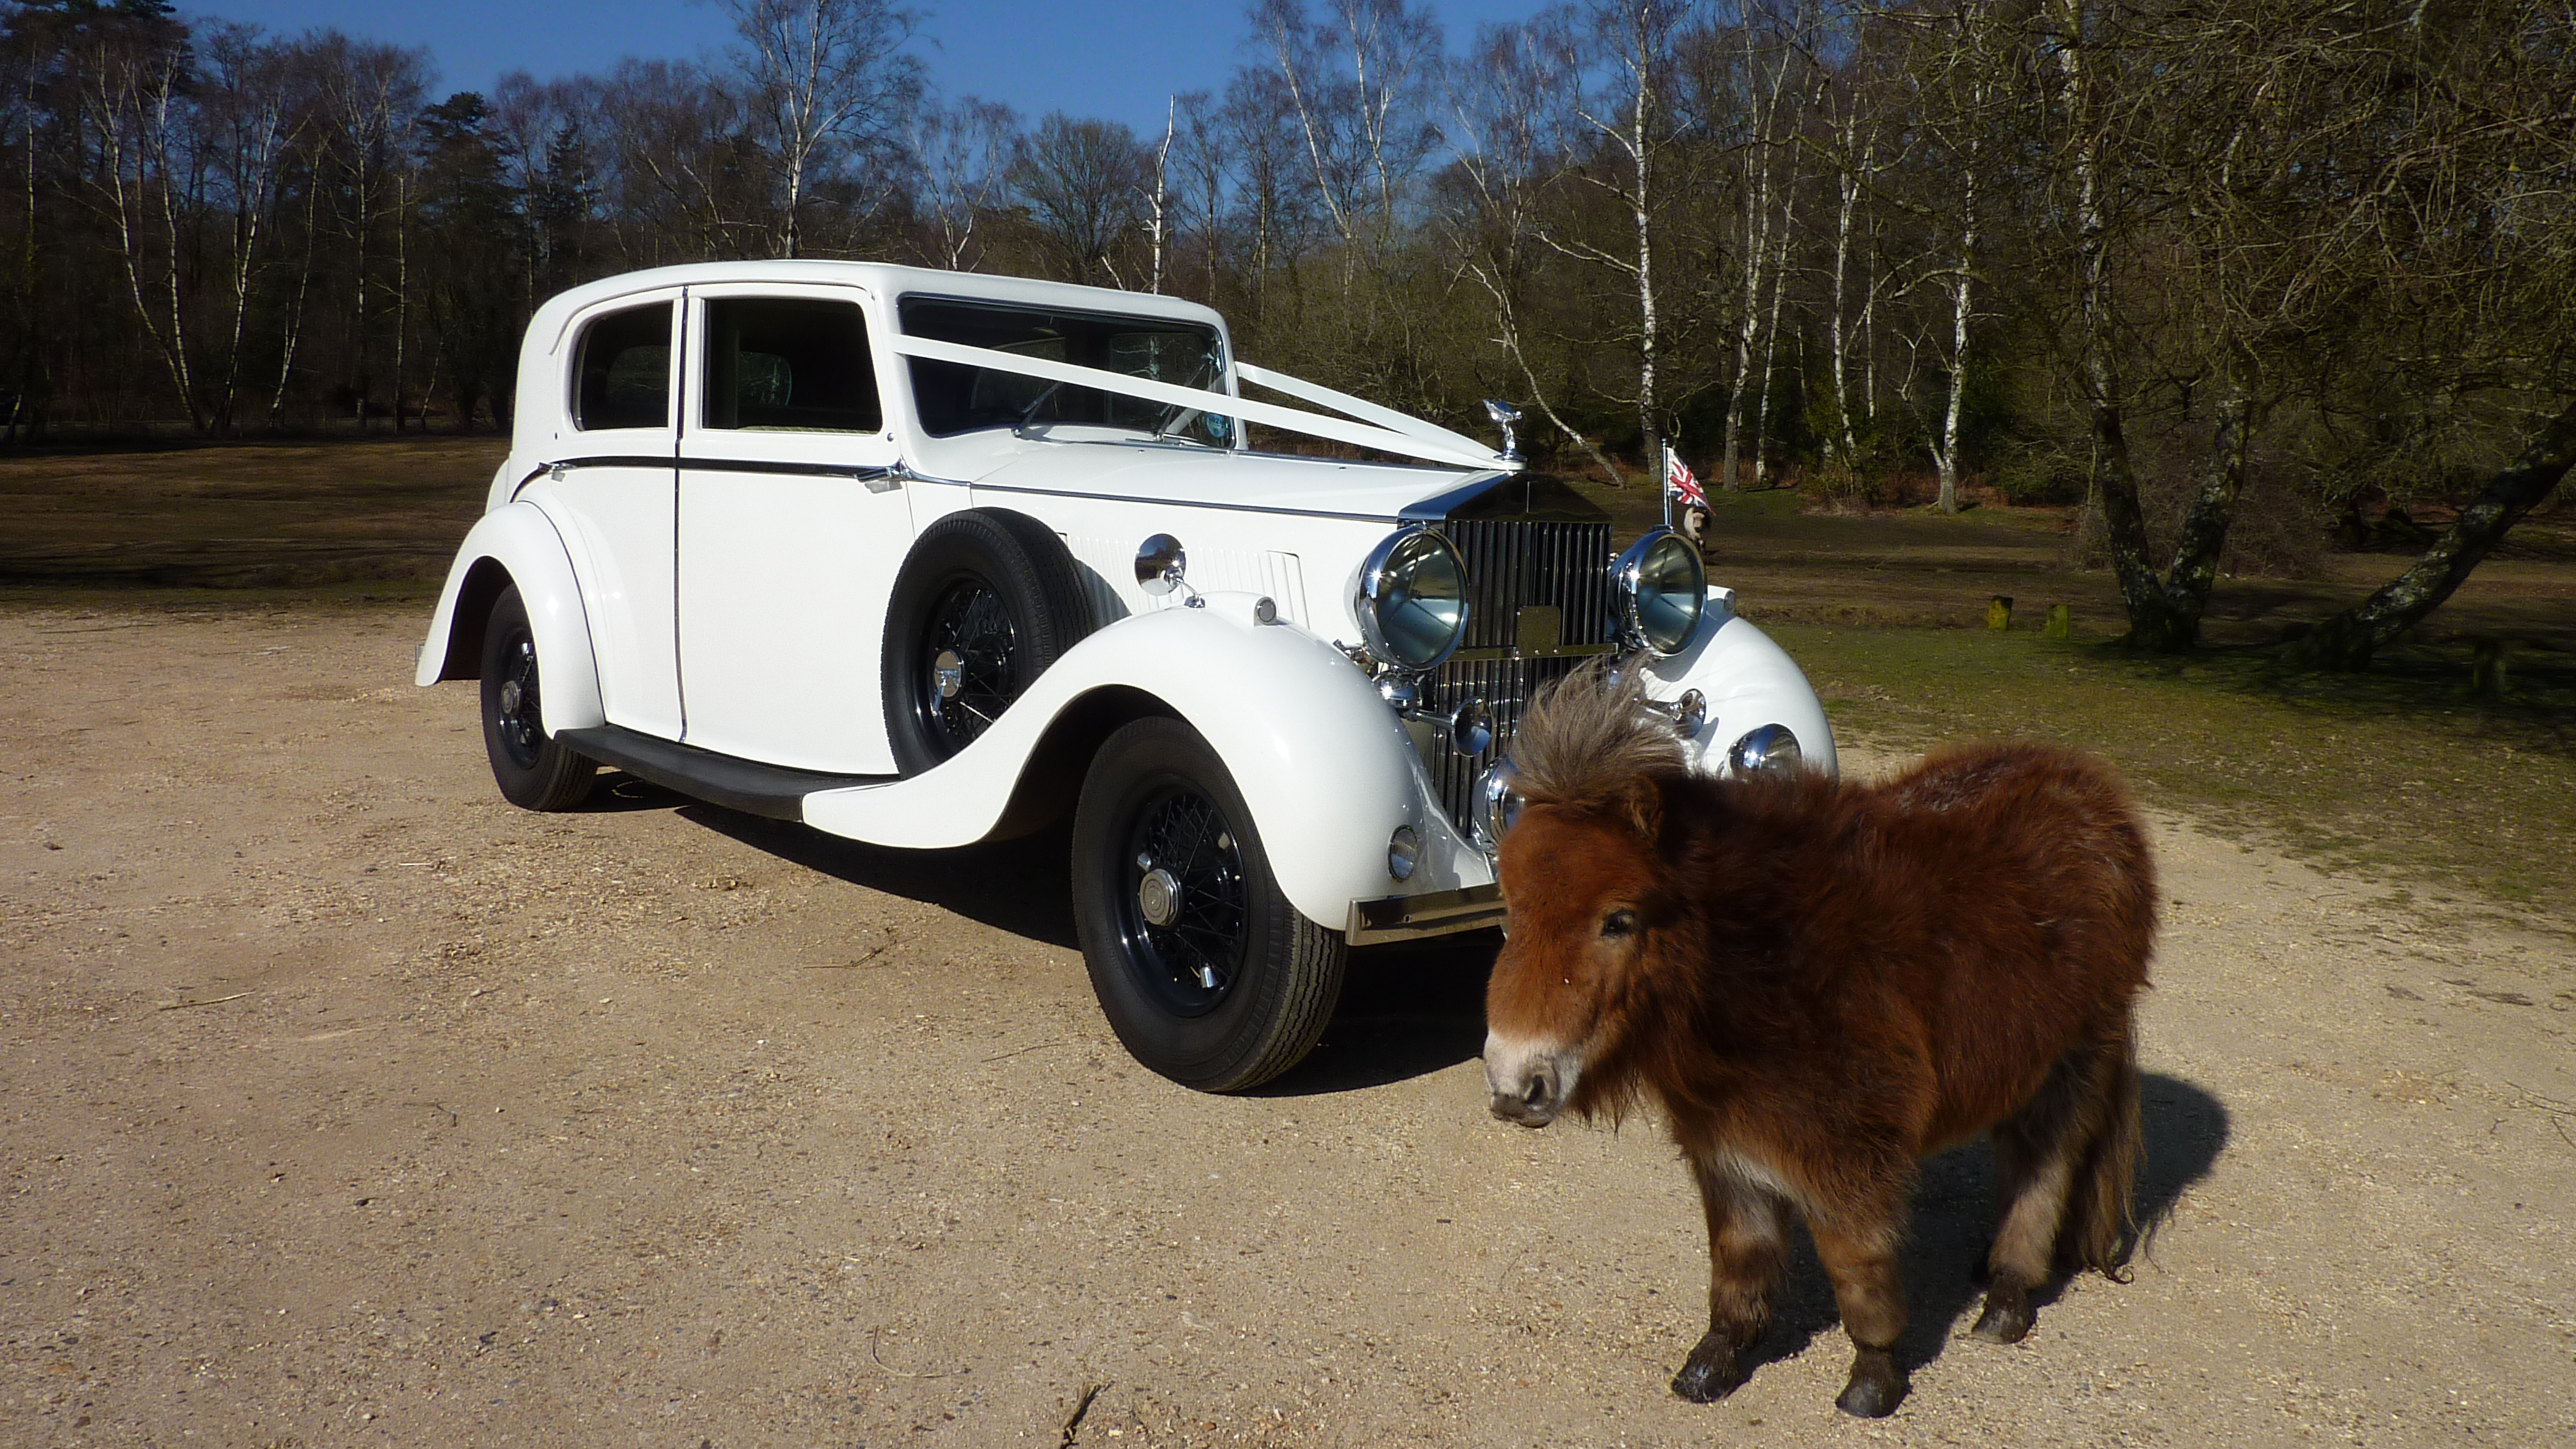 White Vintage Rolls-Royce with traditional white ribbons parked in the New Forest National Park in Hampshire. A Brown pony is standing in front of the vehicle.